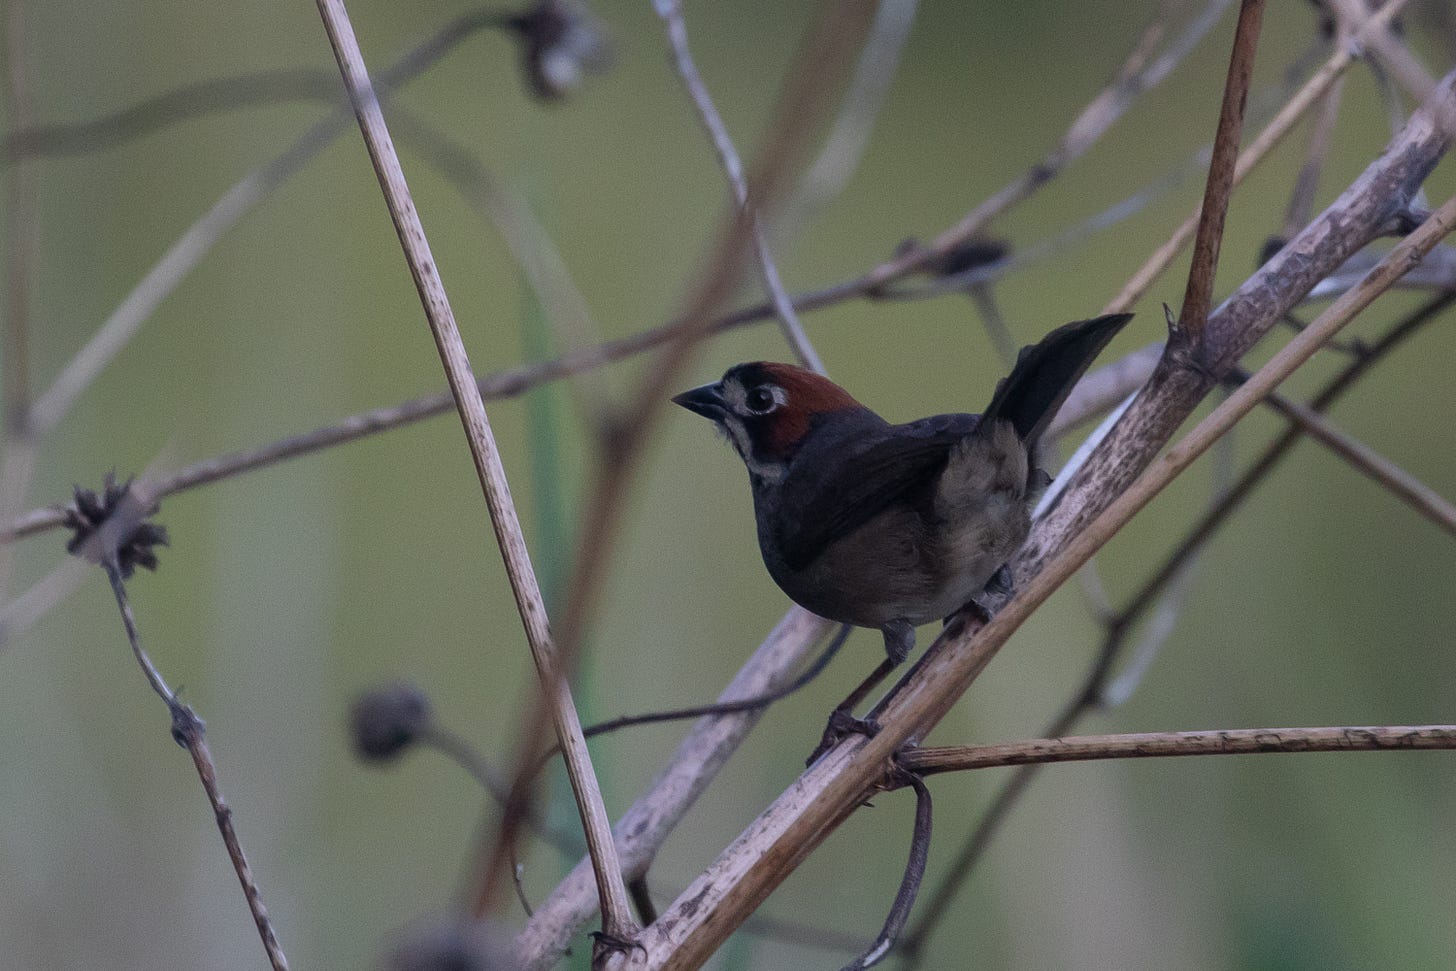 a cabanis' ground sparrow - gray-backed, rusty-crowned, black-beaked, portly ground bird, perched among some sticks with its tail cocked, facing left.